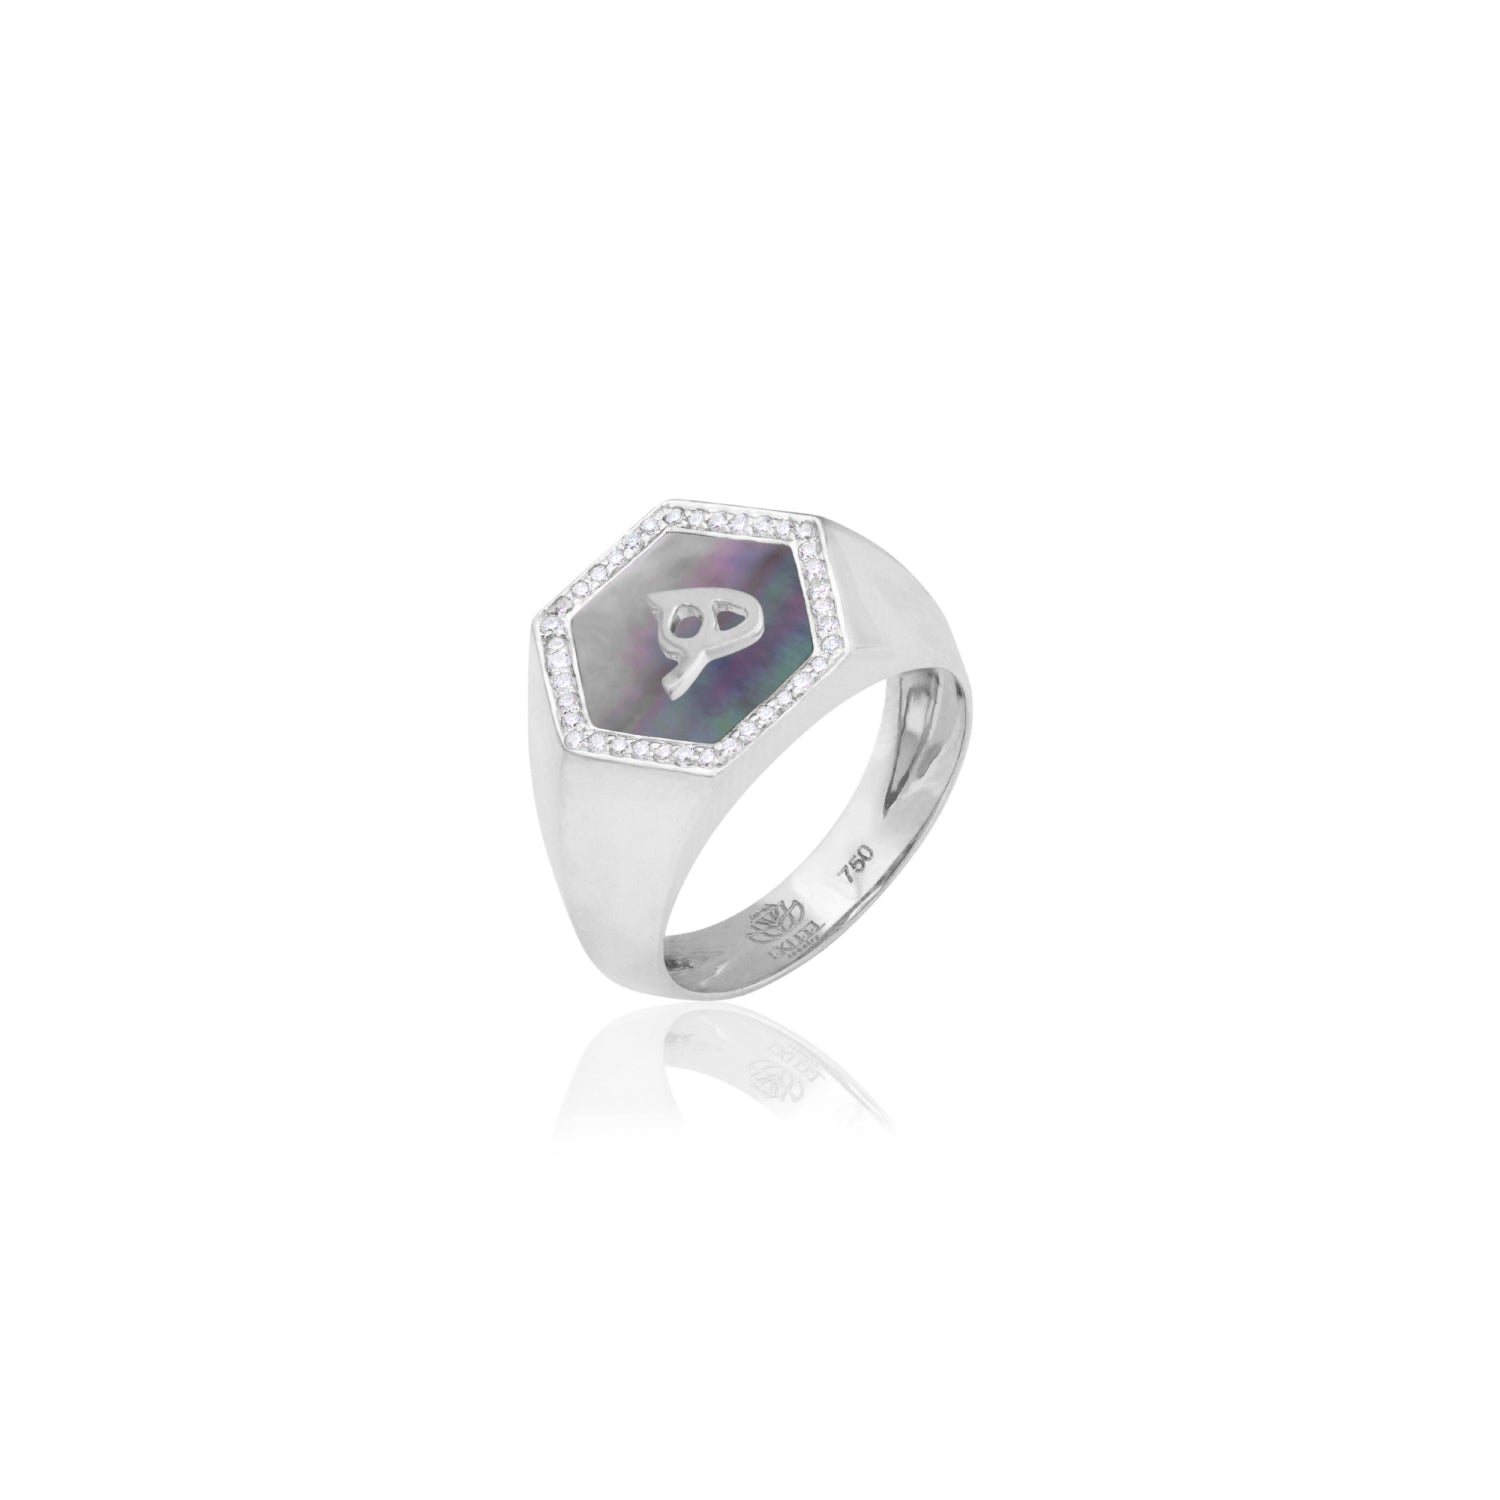 Qamoos 2.0 Letter هـ Black Mother of Pearl and Diamond Signet Ring in White Gold